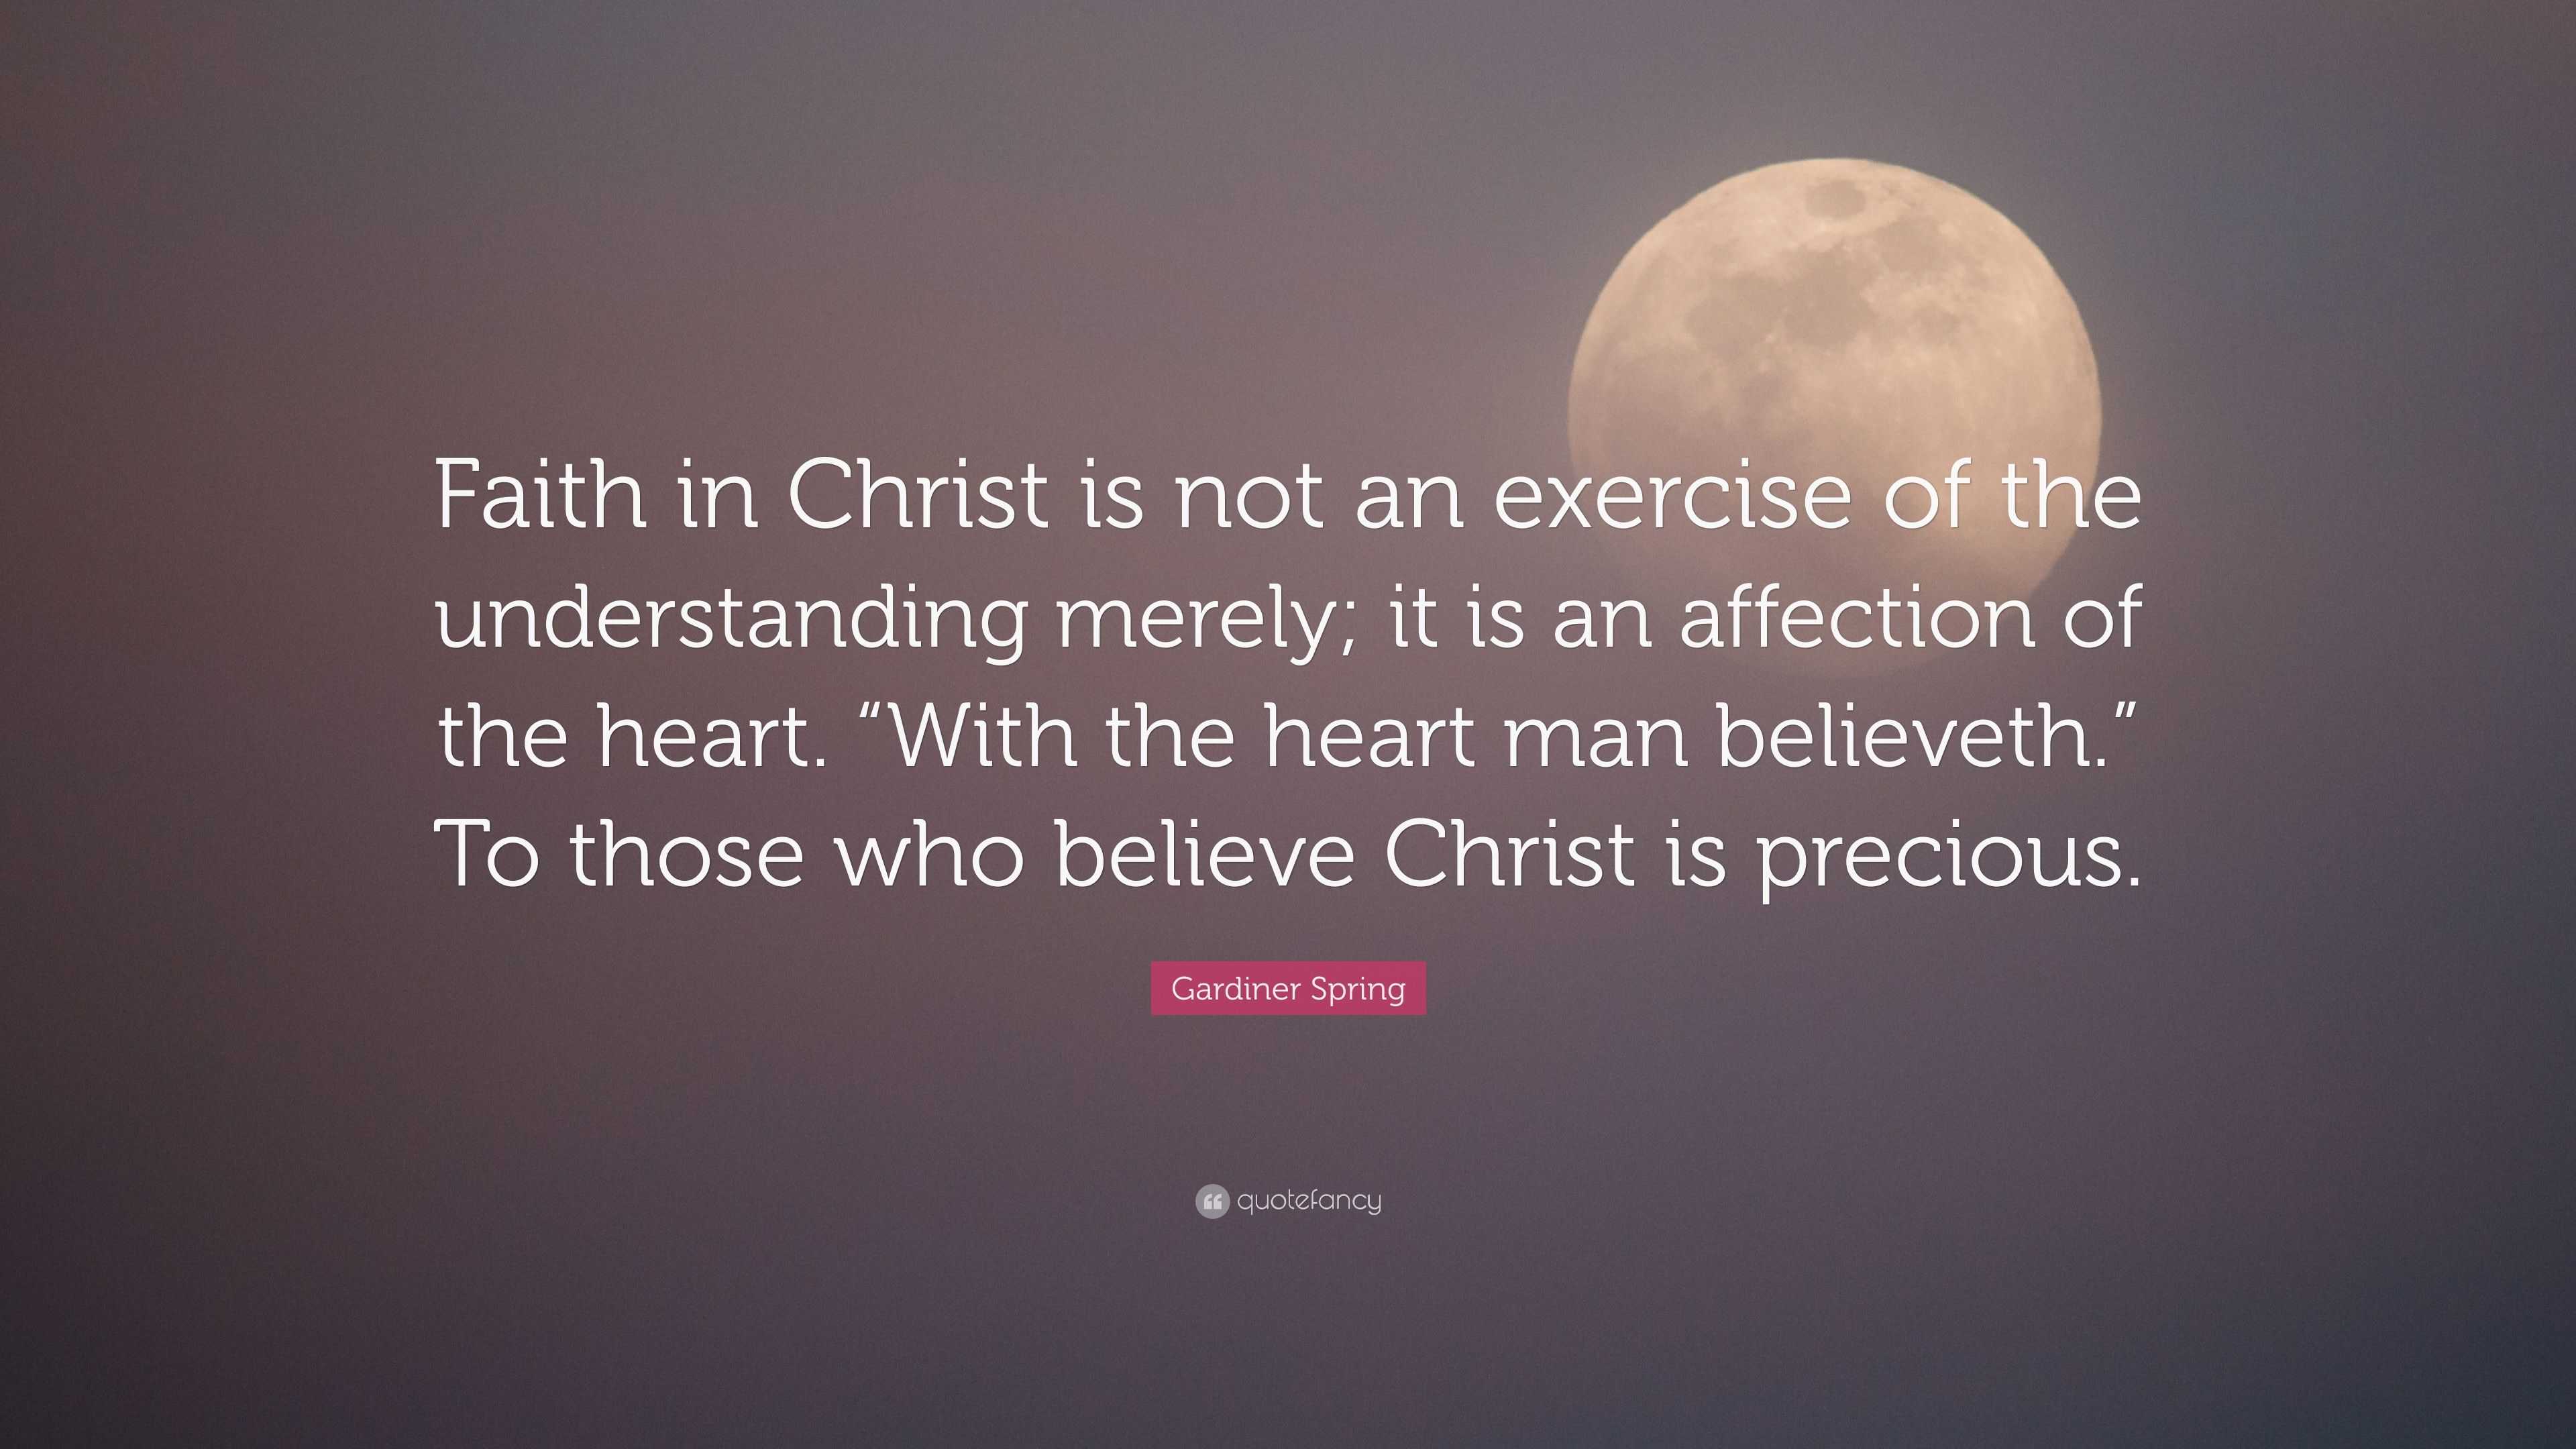 Gardiner Spring Quote: “Faith in Christ is not an exercise of the ...